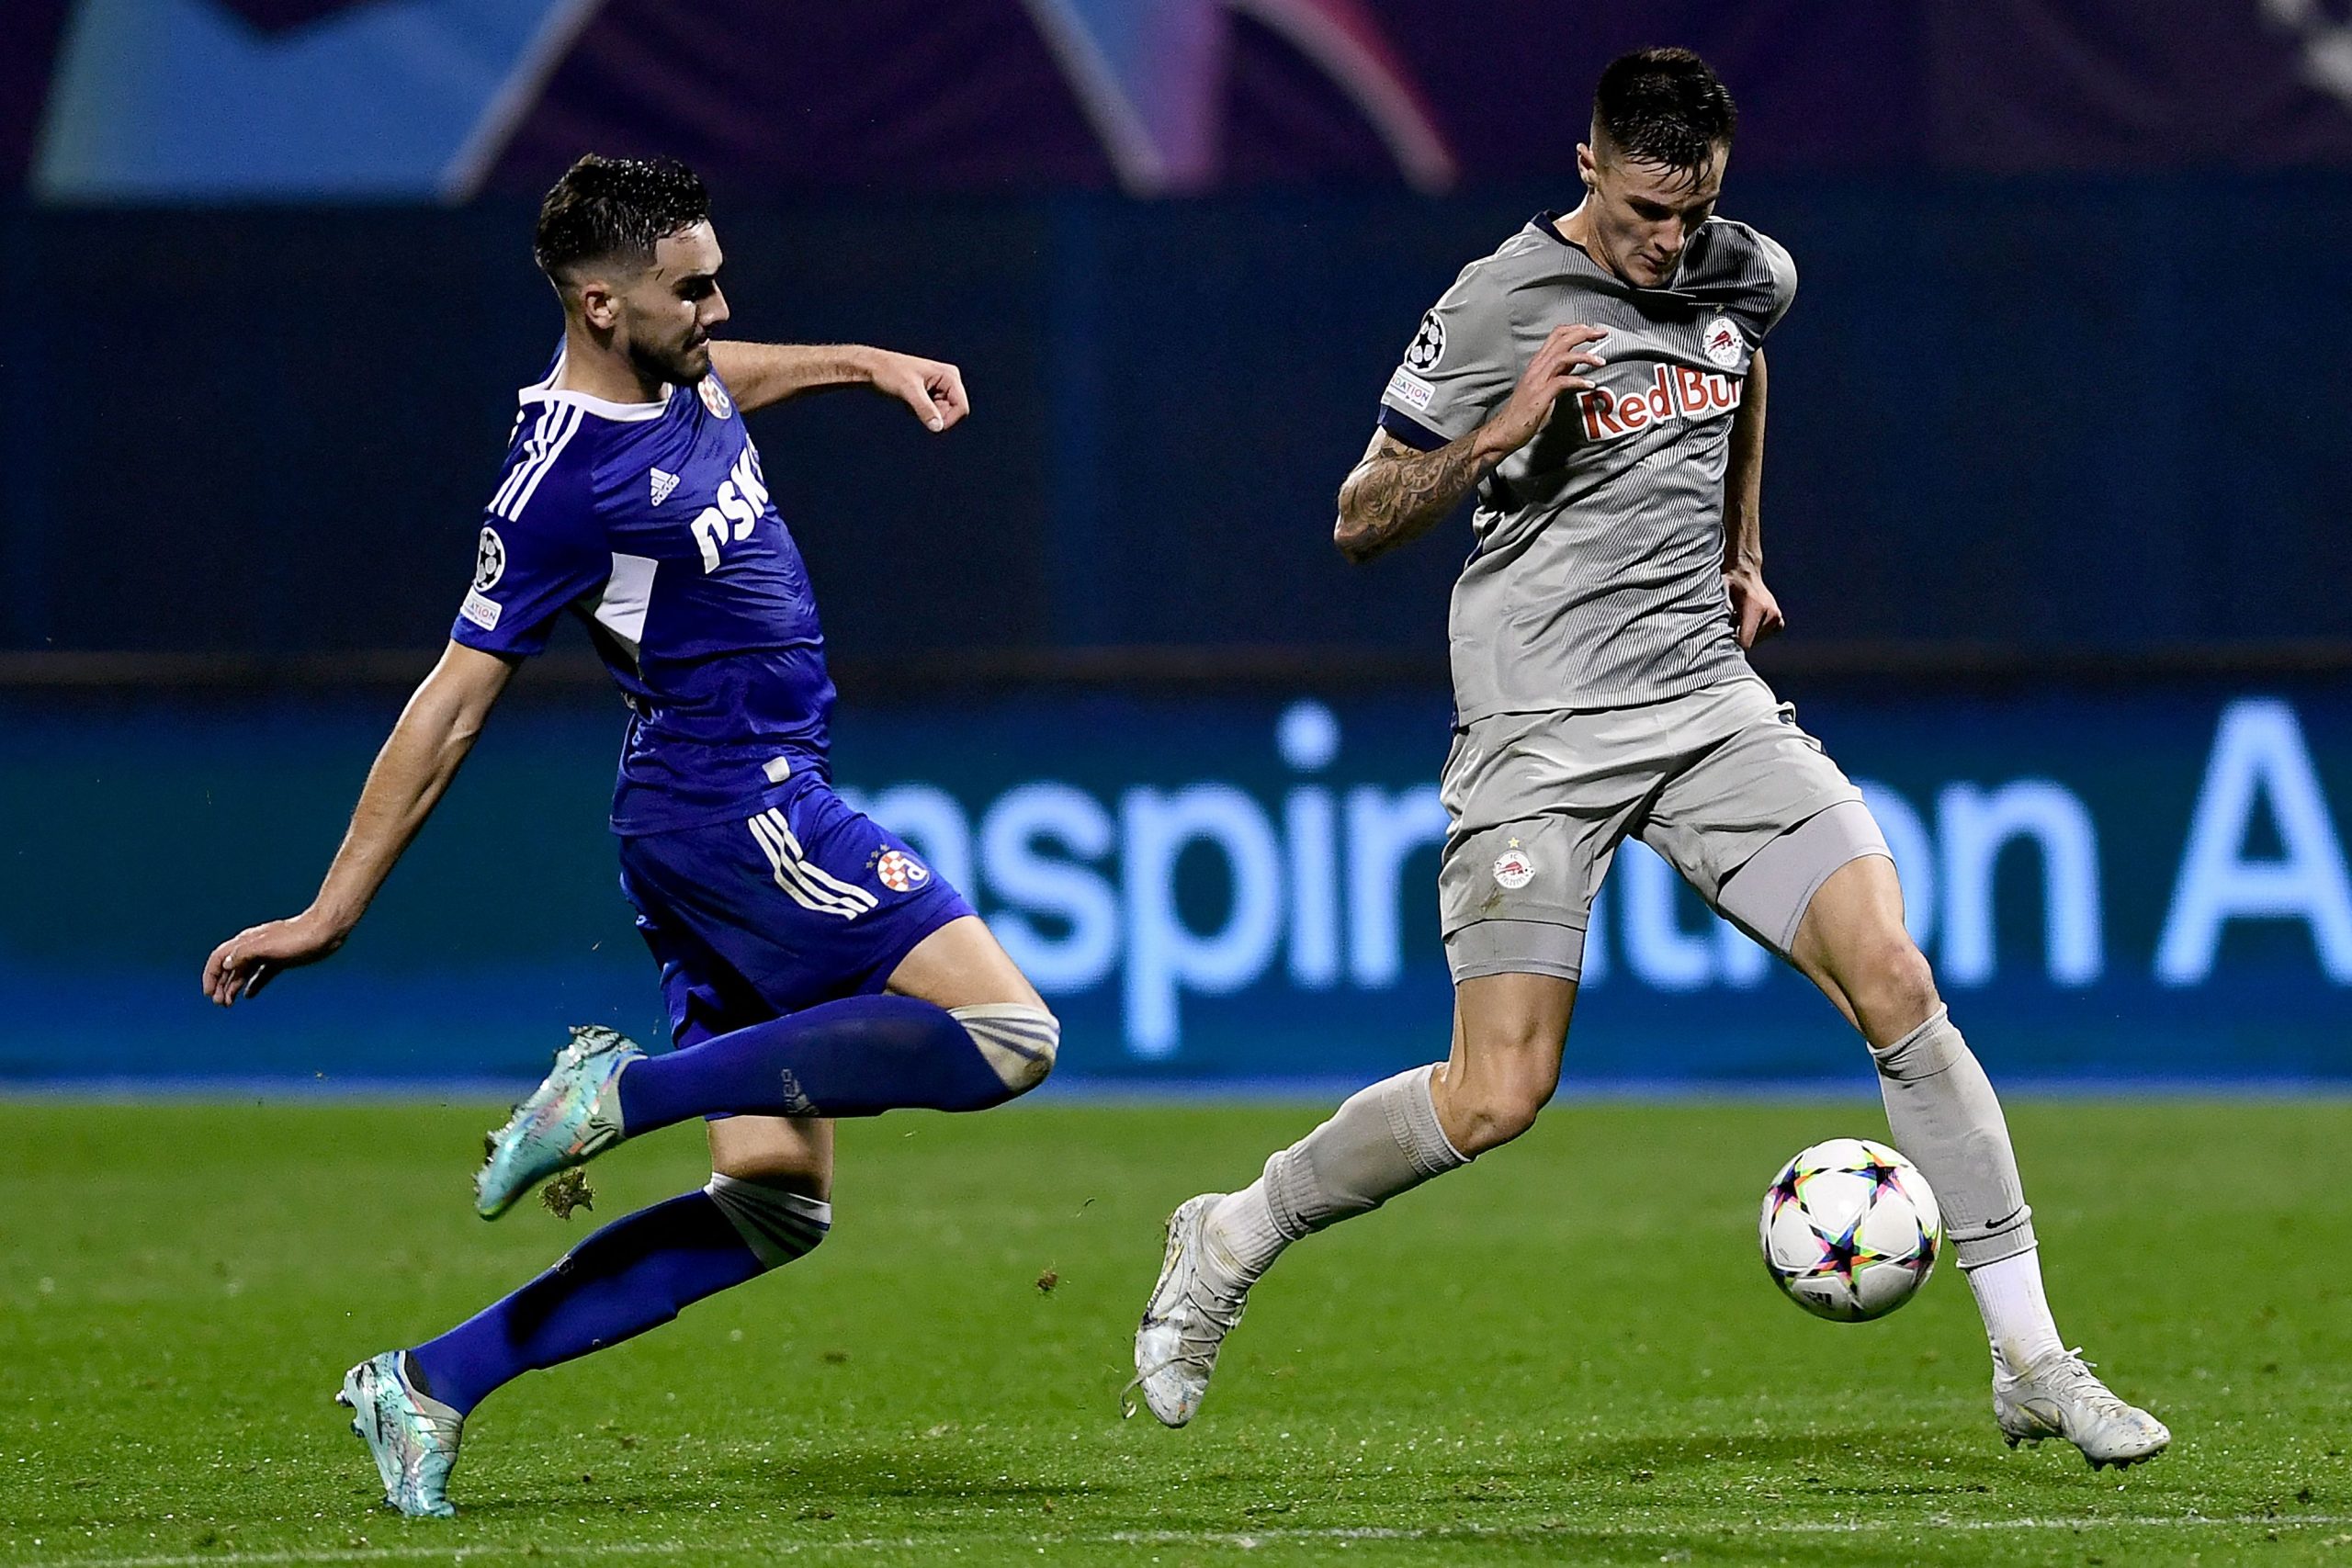 RB Salzburg's Benjamin Sesko controls the ball in front of Dinamo Zagreb's Josip Misic in their UEFA Champions League group match.